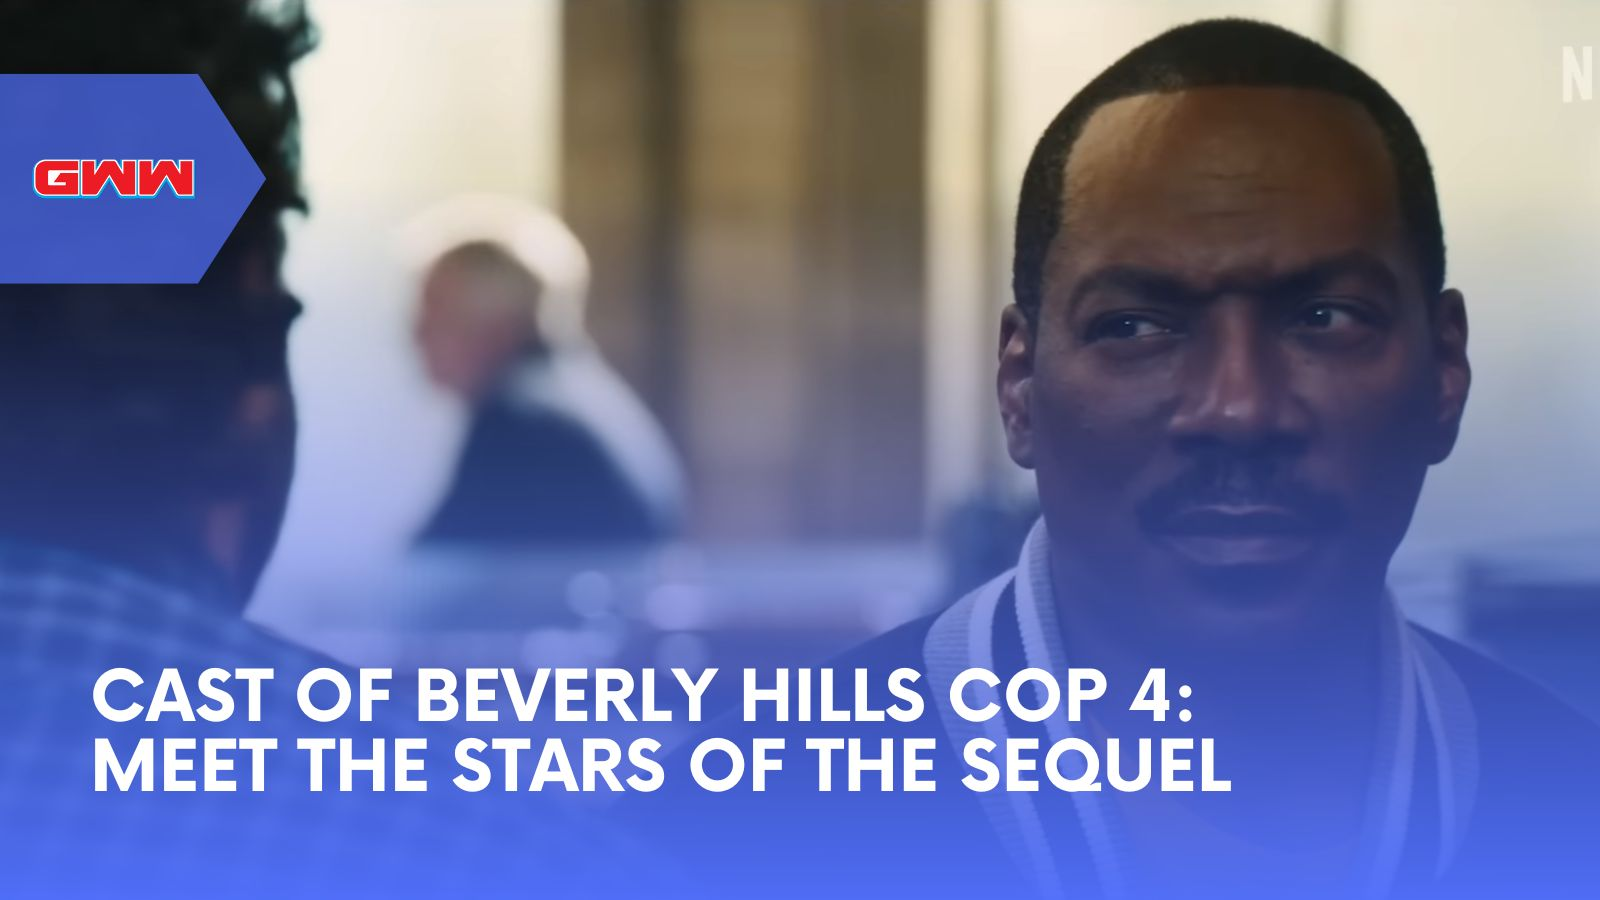 Cast of Beverly Hills Cop 4: Meet the Stars of the Sequel